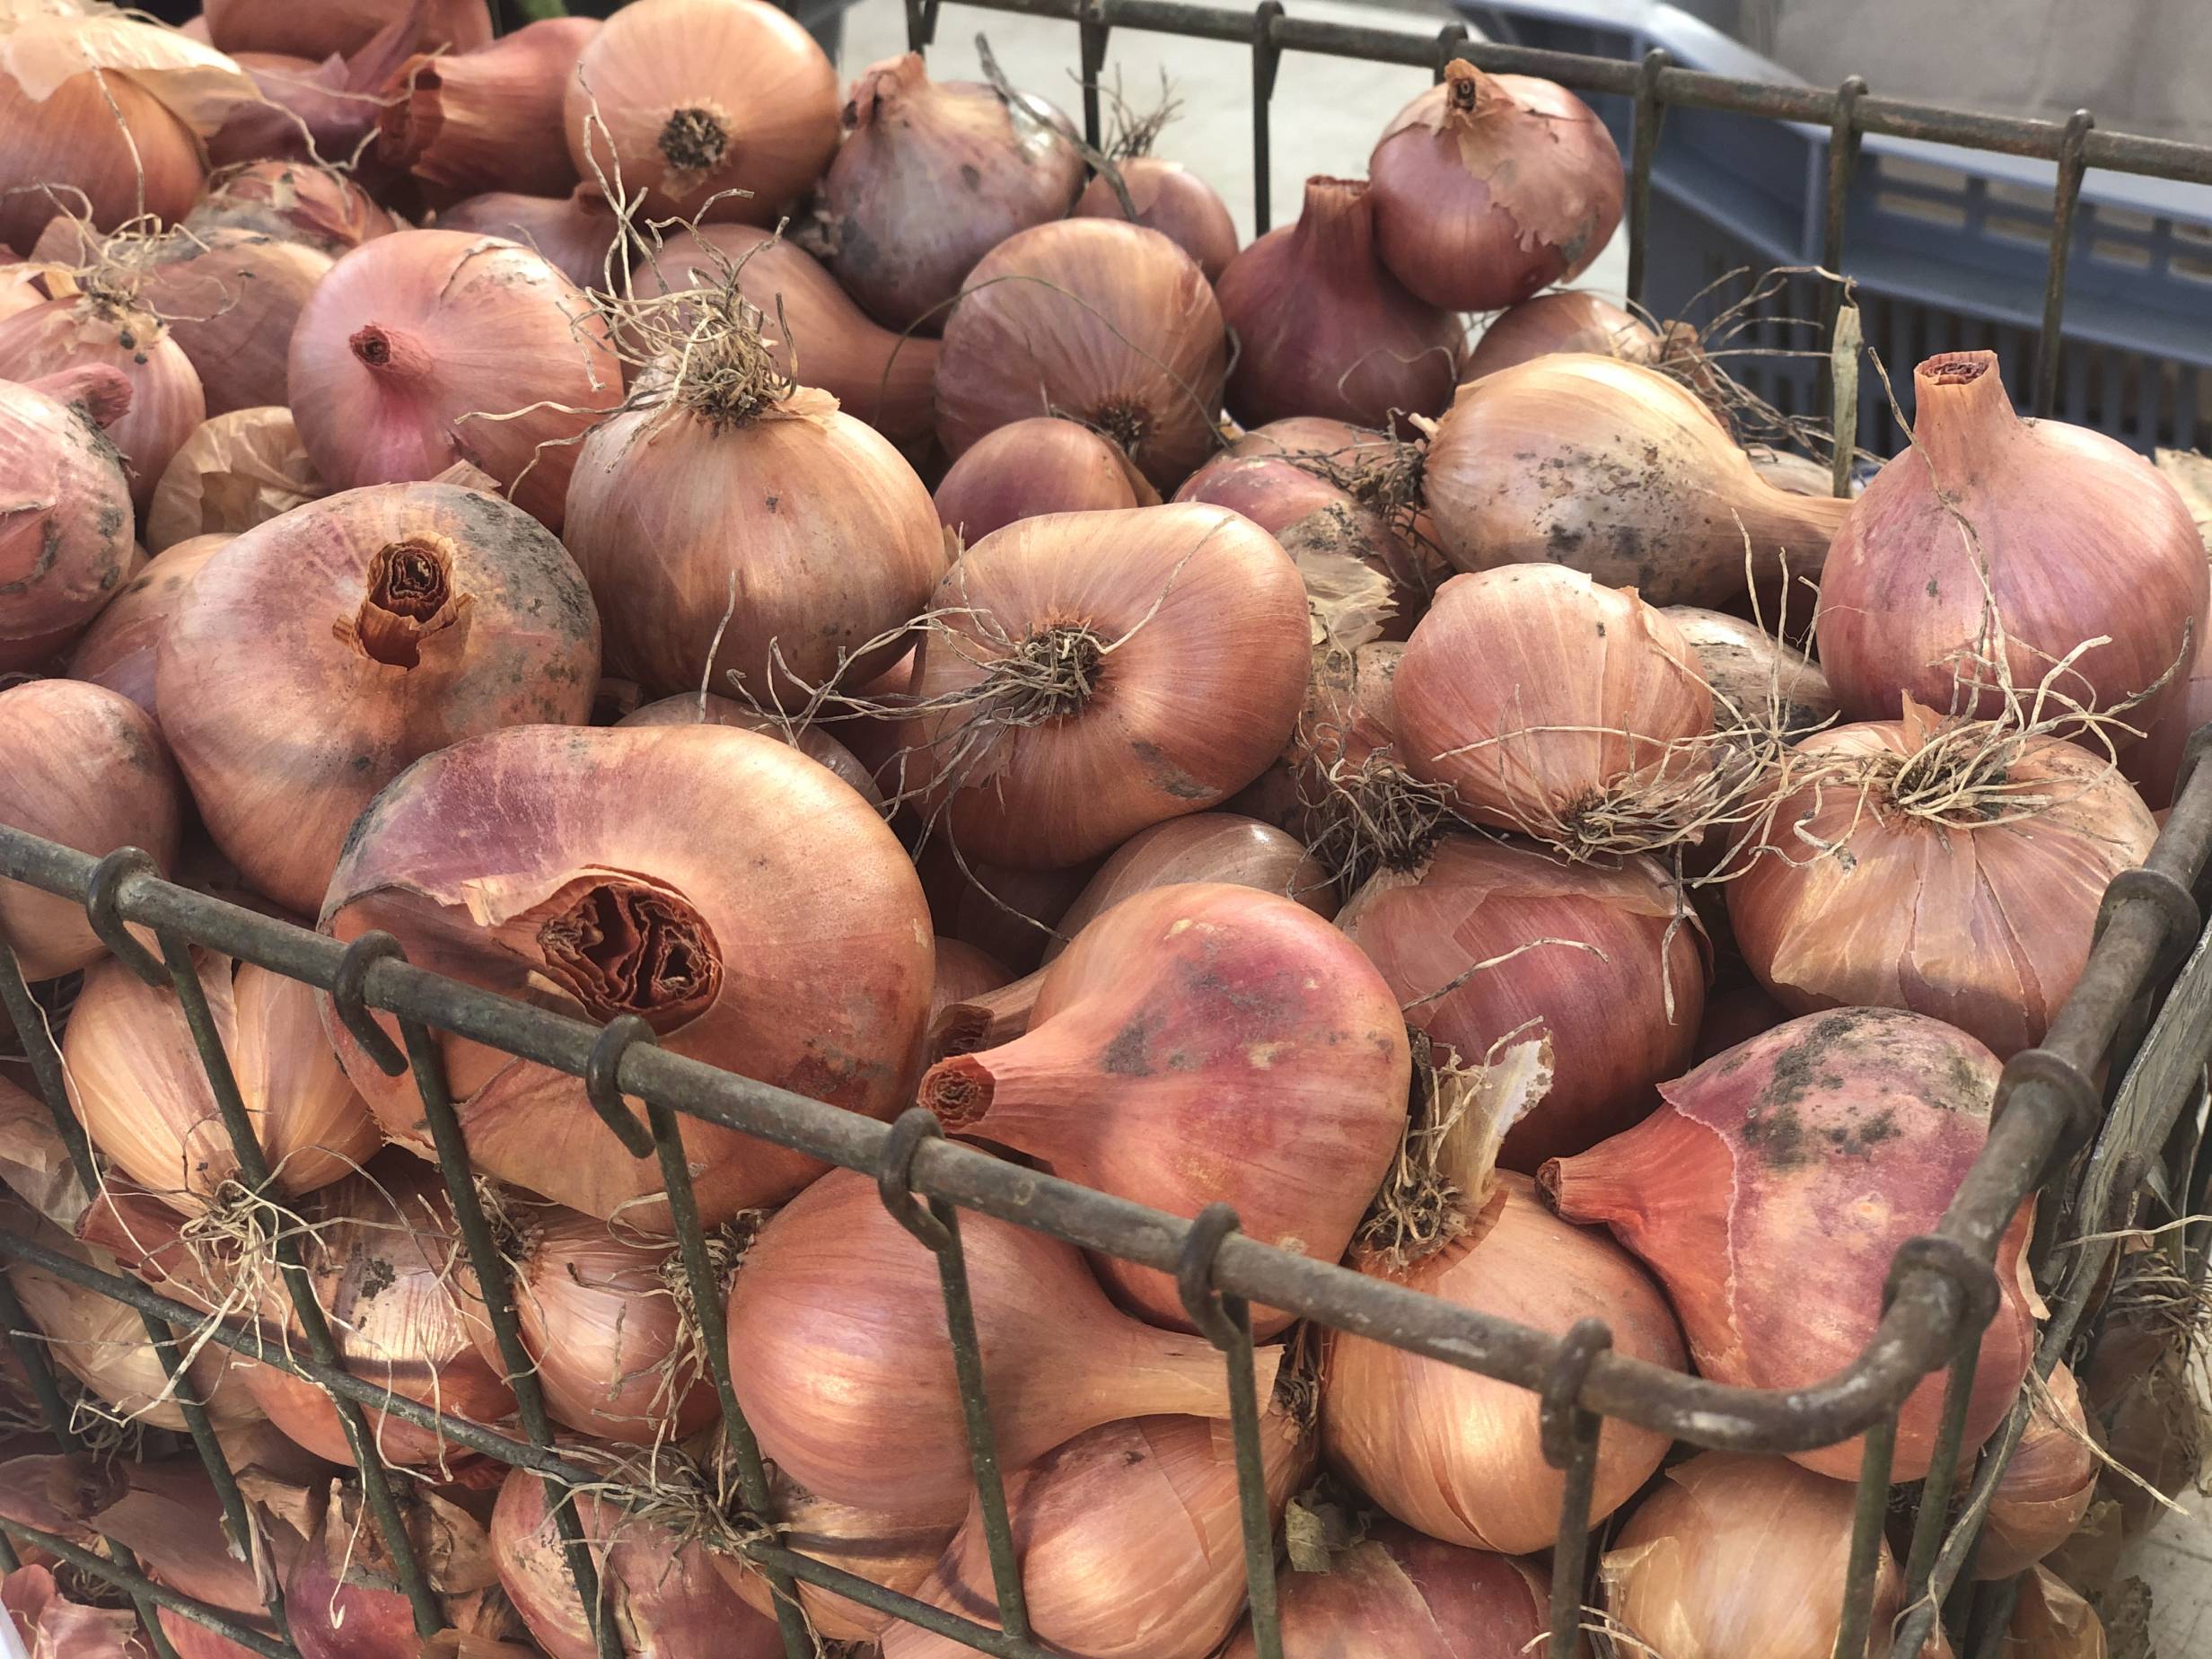 In a rusty brown metal basket, there are many yellow onions with rose colored outer layers, roots, and bits of dirt at the Urbana Market in the Square. Photo by Alyssa Buckley.